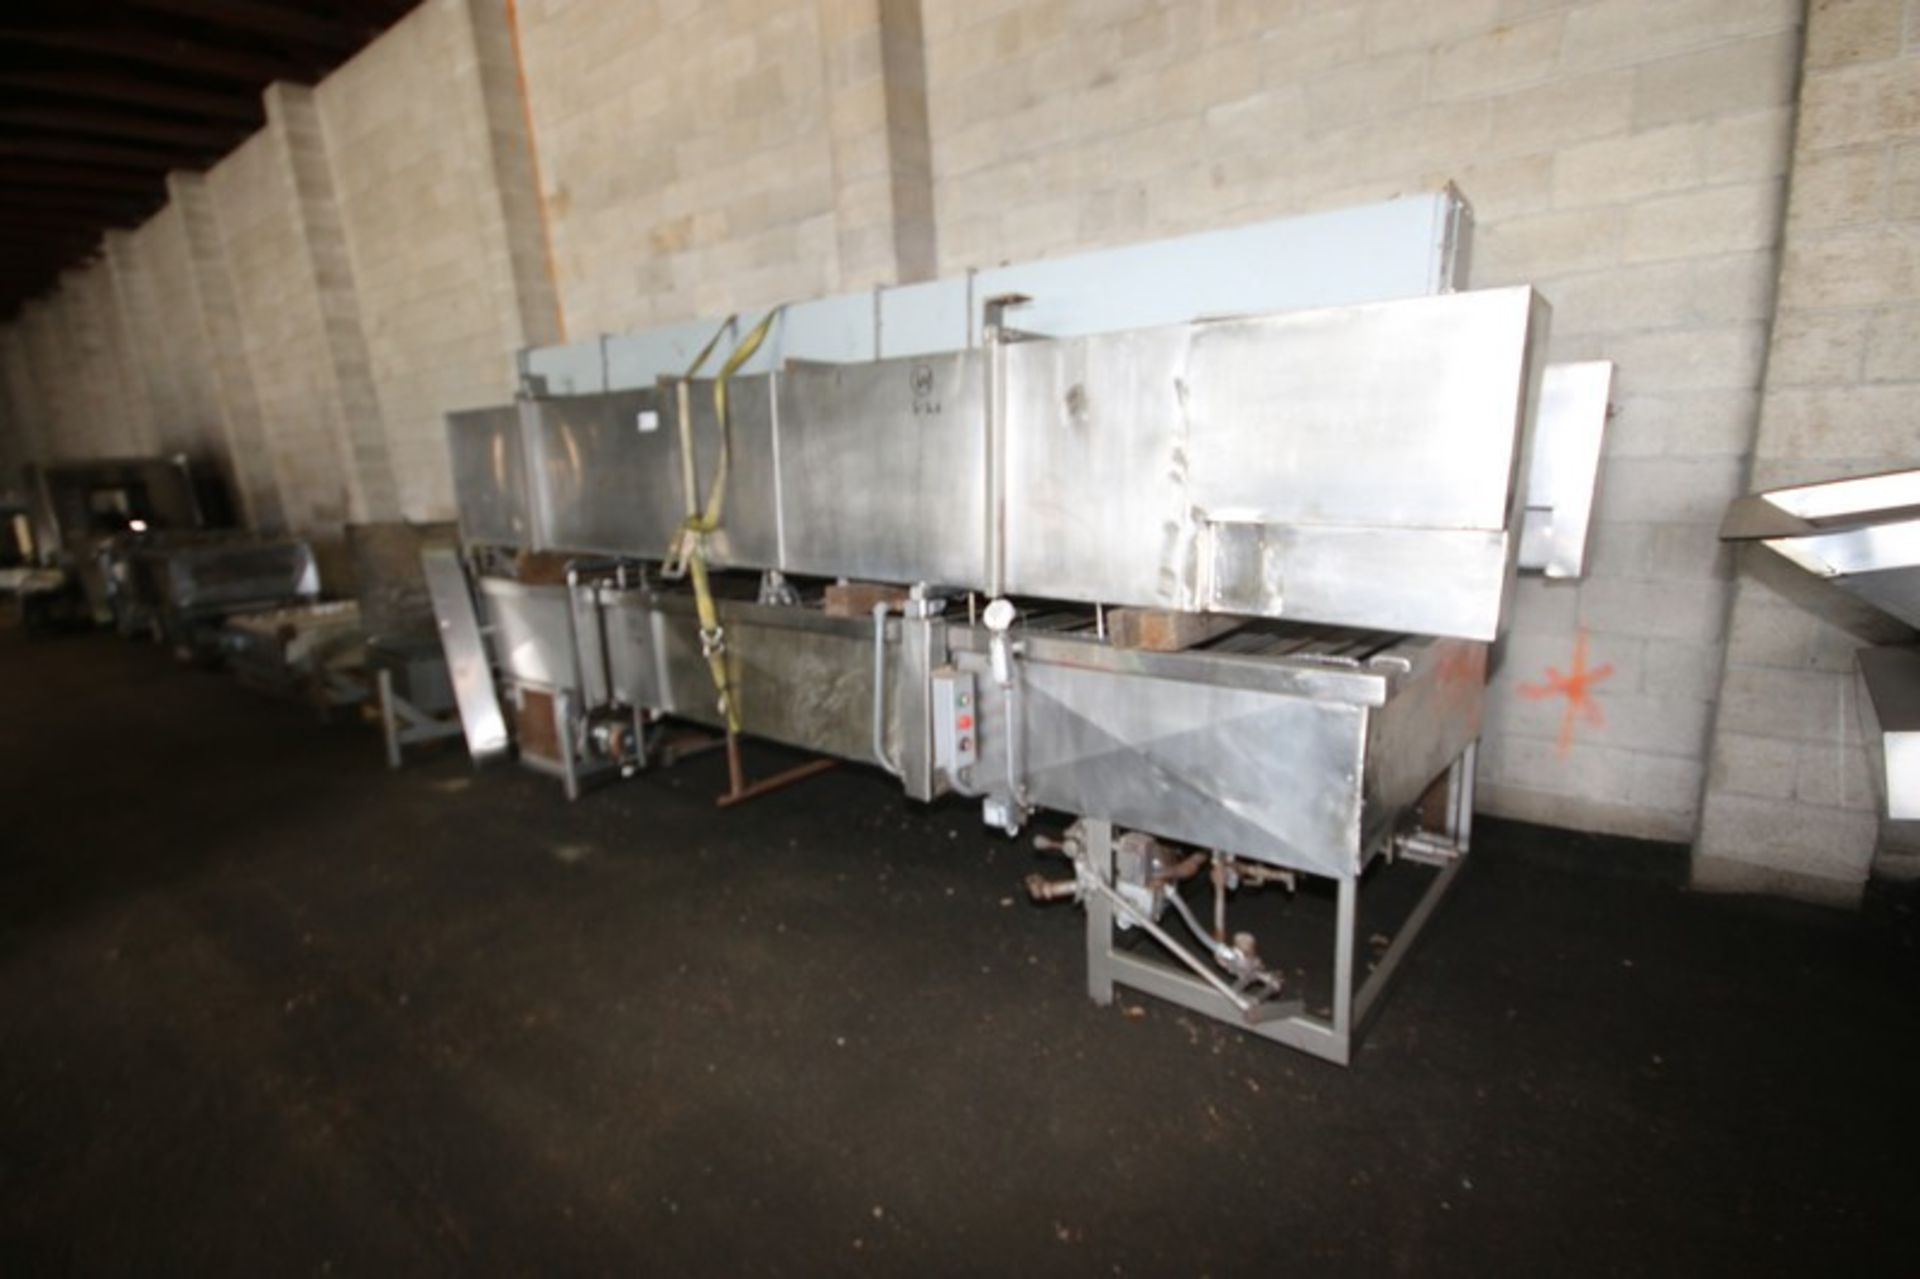 Higgs S/S Conveyor Bakery Fryer,Natural Gas Heated, 14' L x 54"W, Includes Exhaust Hood & Control - Image 2 of 11